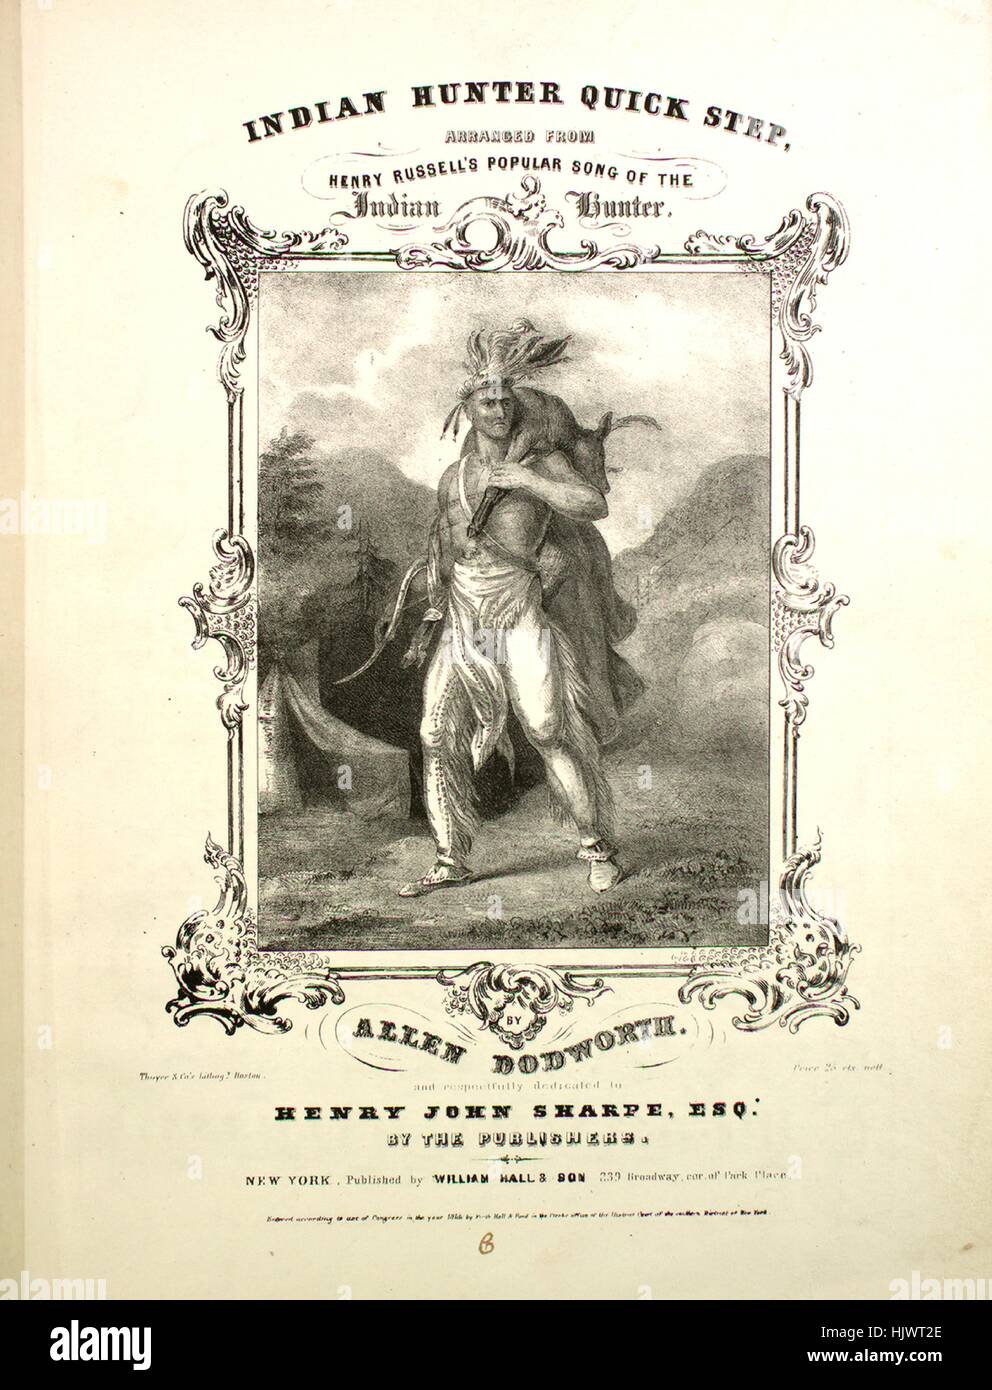 Sheet music cover image of the song 'Indian Hunter Quick Step', with original authorship notes reading 'Arranged from Henry Russell's Popular Song of the Indian Hunter by Allen Dodworth', United States, 1844. The publisher is listed as 'William Hall and Son, 239 Broadway, cor. of Park Place', the form of composition is 'da capo', the instrumentation is 'piano', the first line reads 'None', and the illustration artist is listed as 'Thayer and Co.'s Lithogy. Boston; G.W. Quidor Engvr.'. Stock Photo